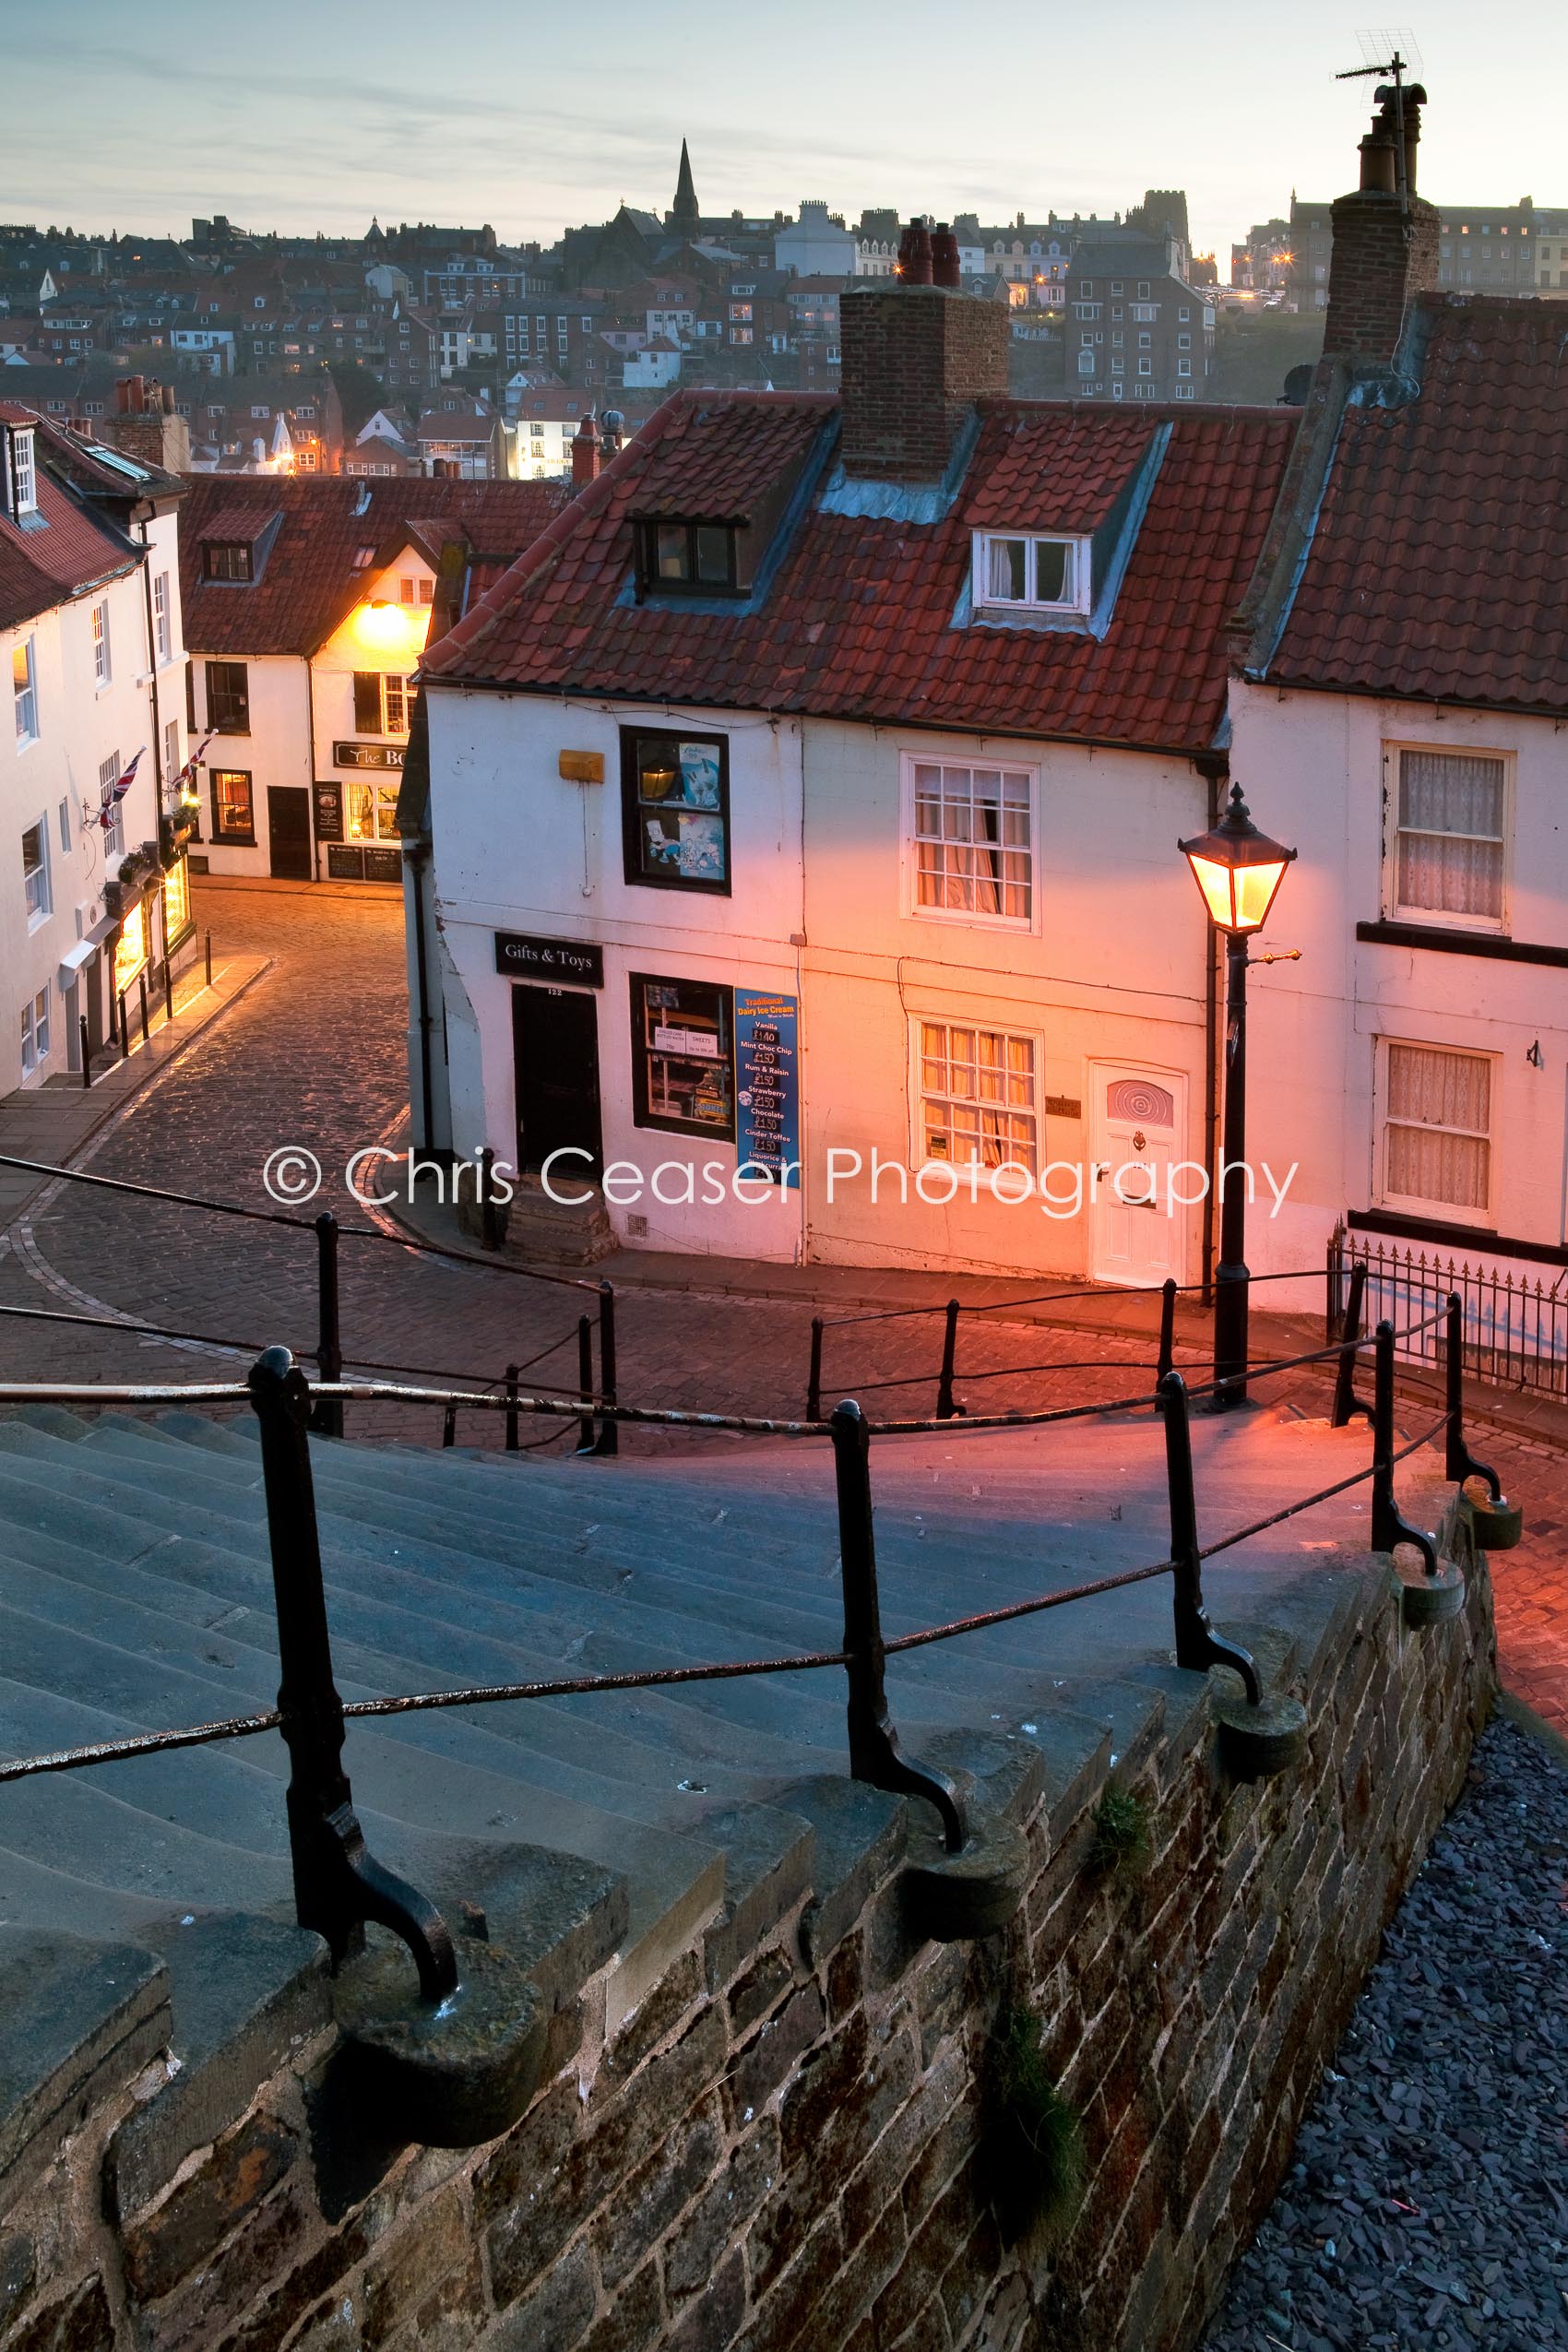 The foot of the steps, Whitby